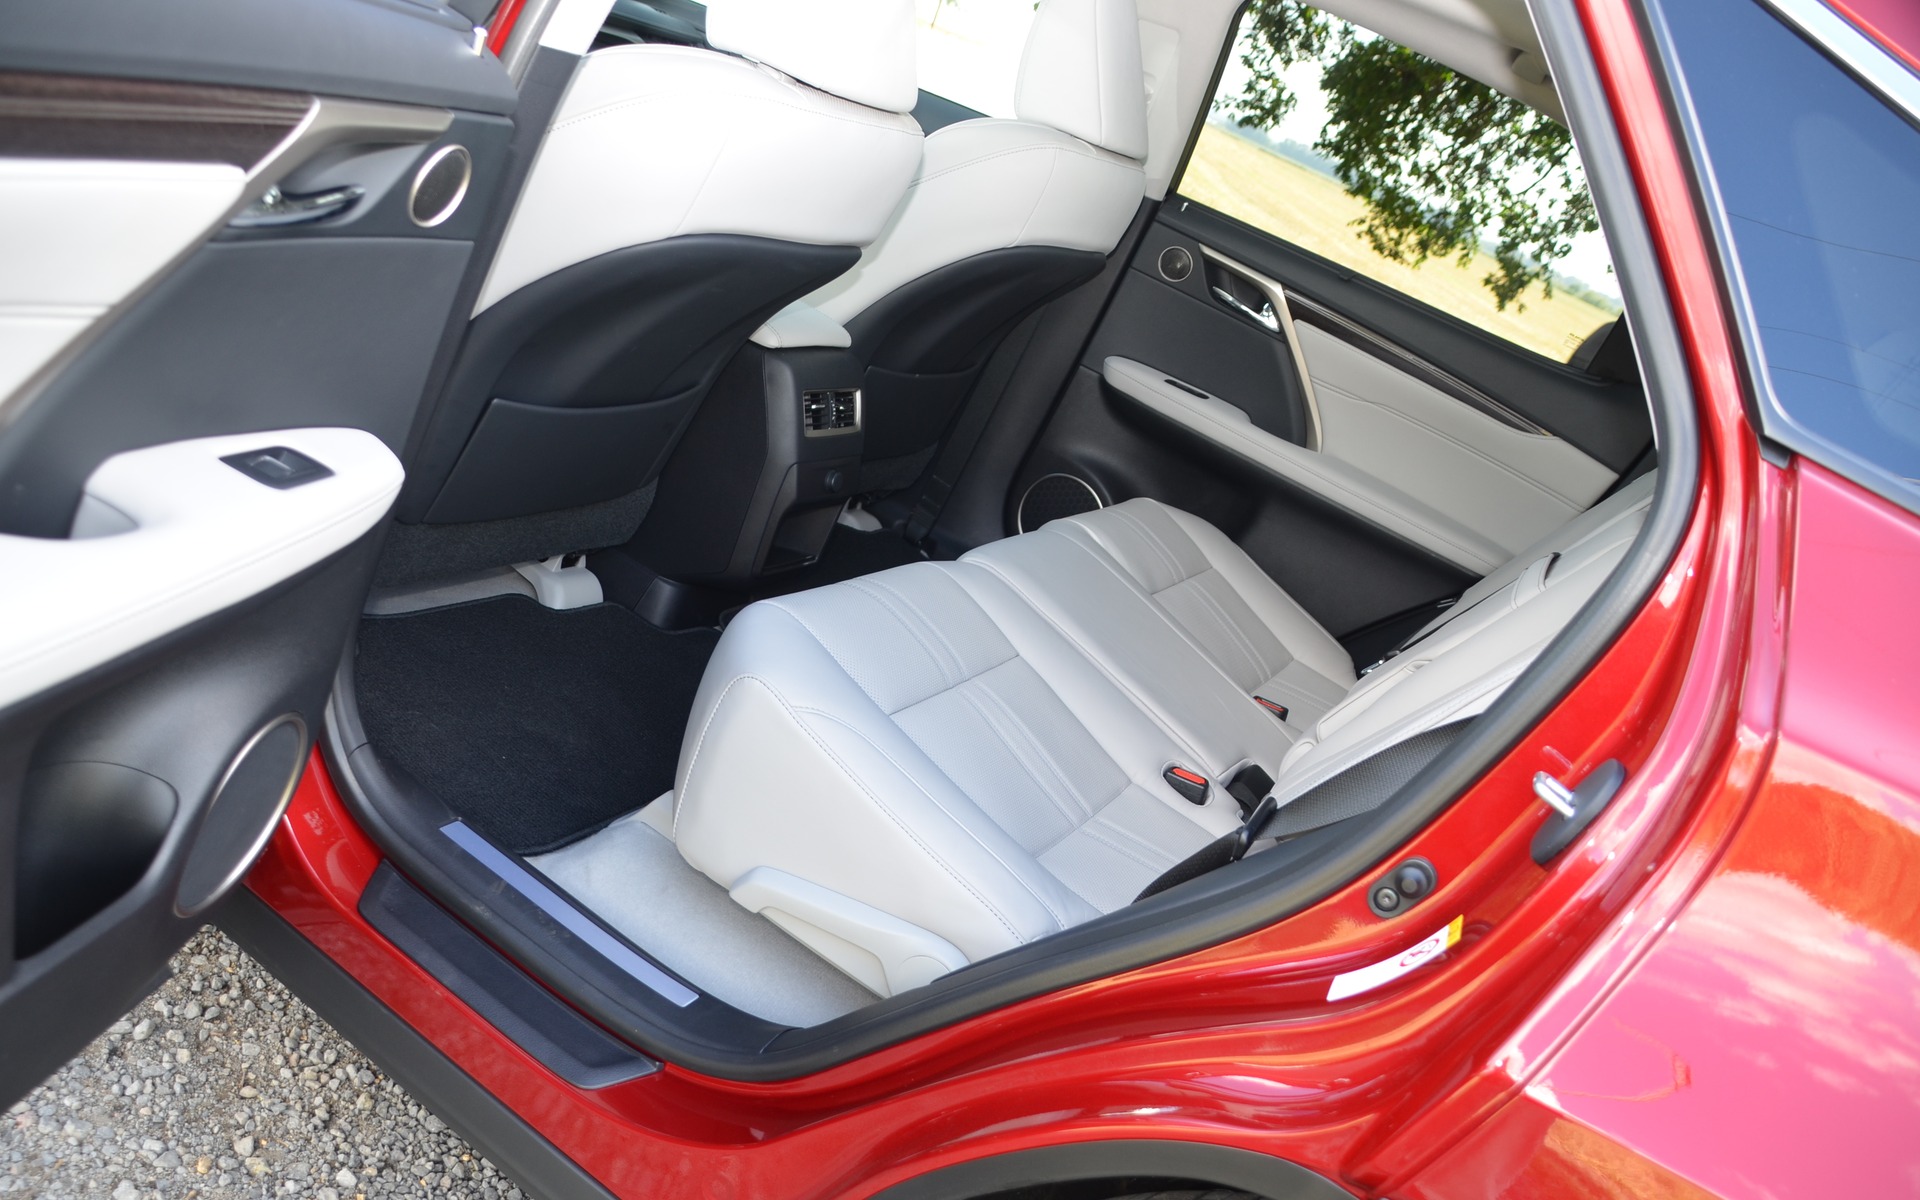 Rear seating is generous and comfortable.